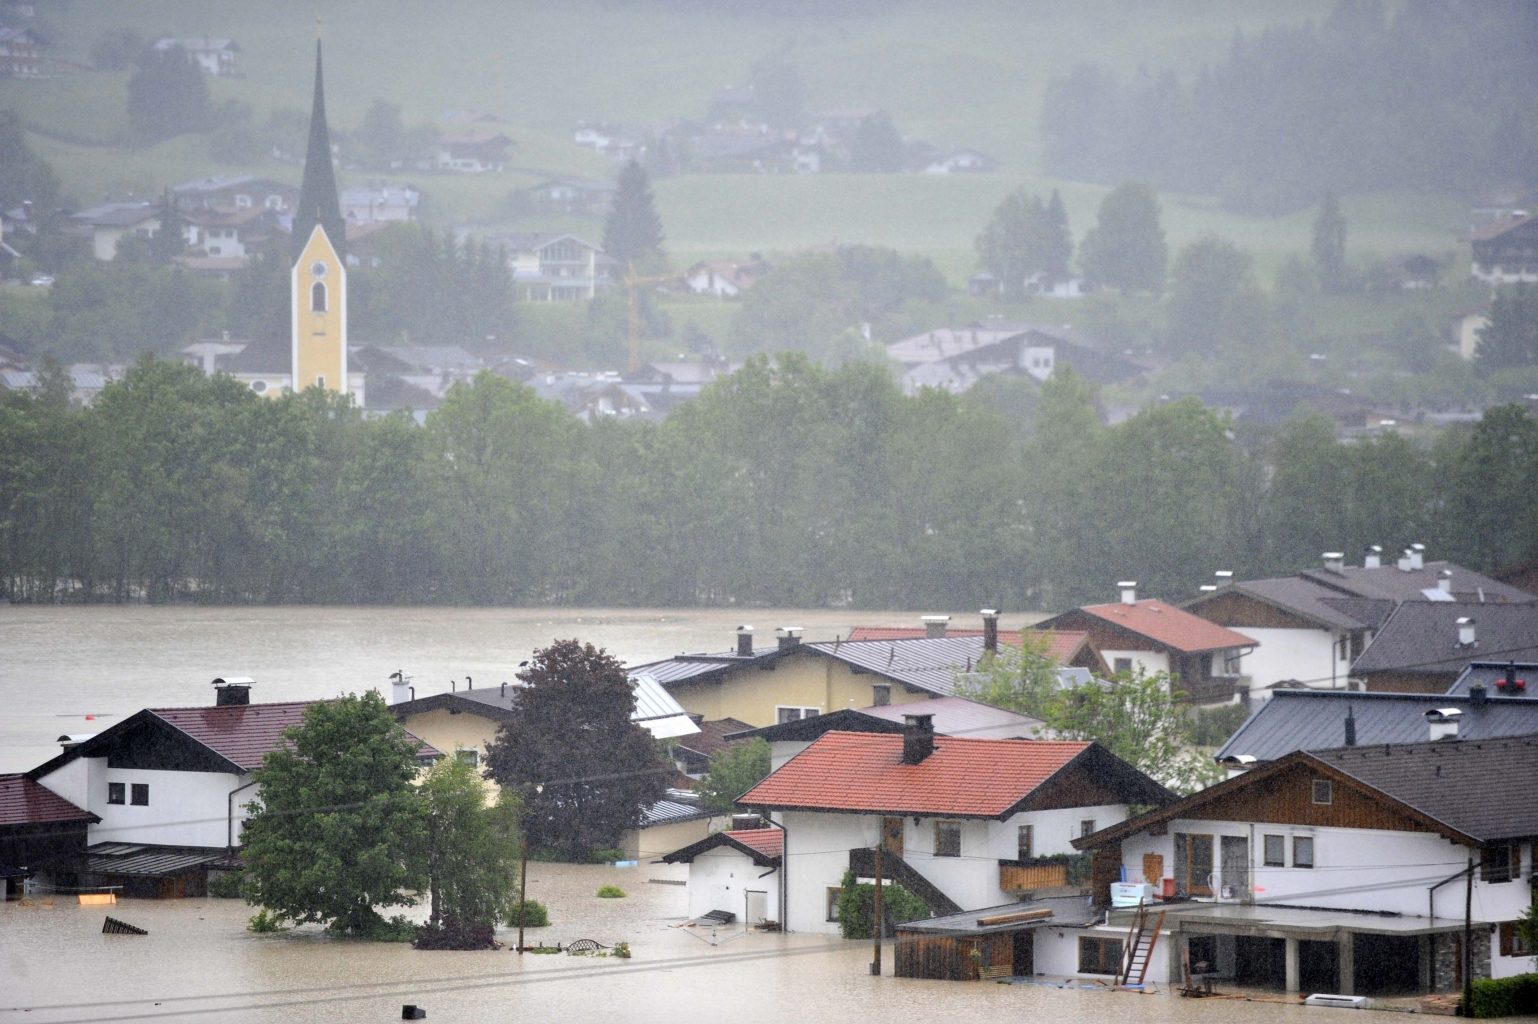 Caritas supports victims of flooding disaster in Austria